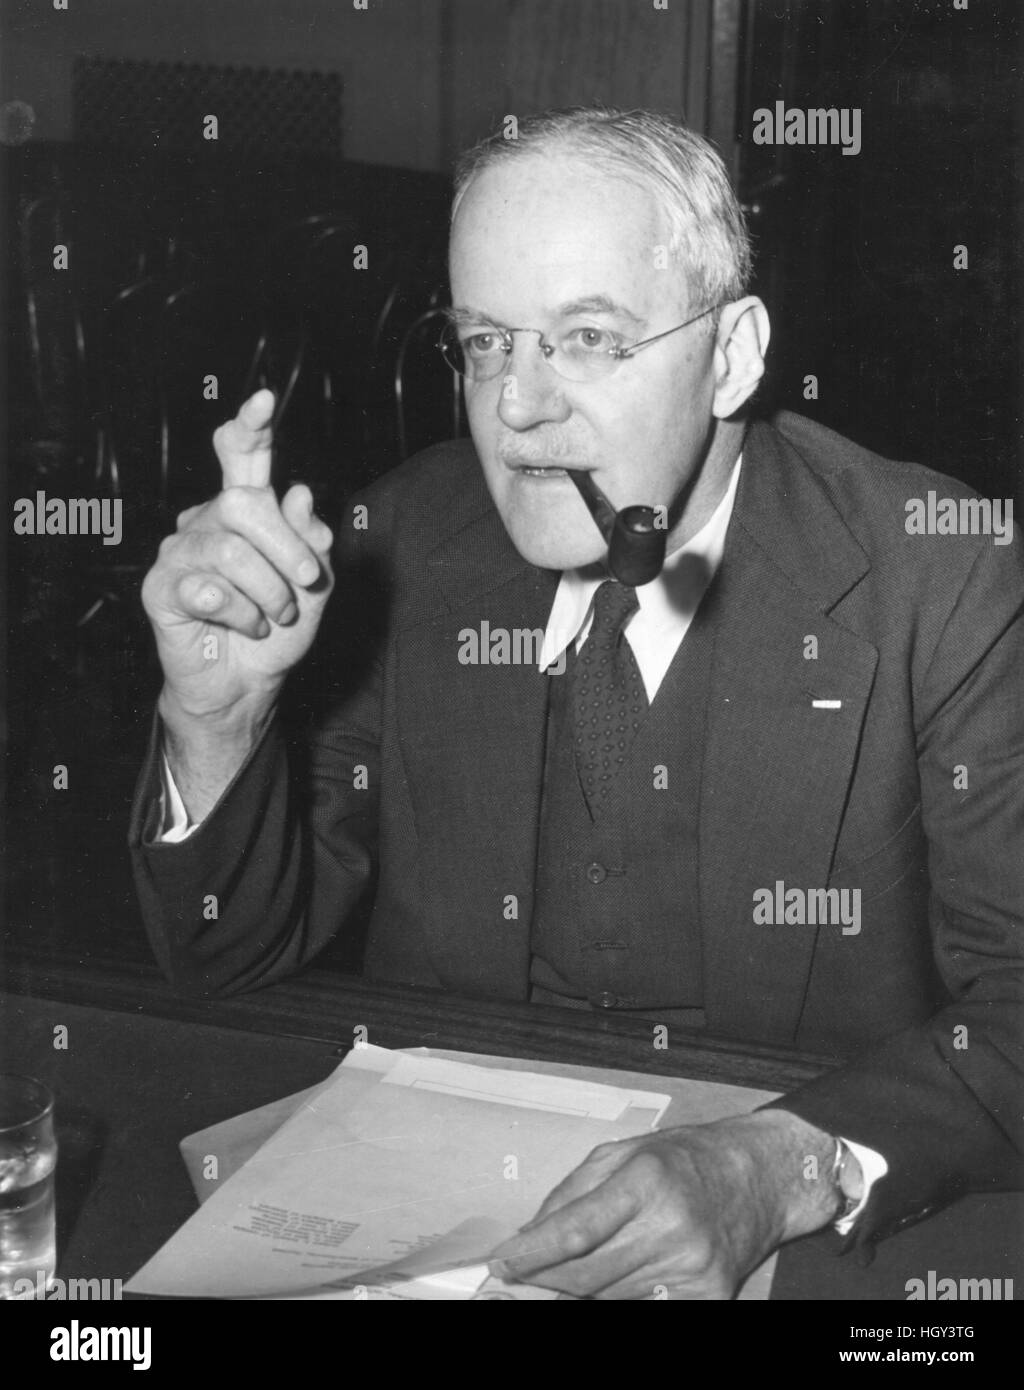 Allen Dulles, nominated to be Director of the Central Intelligence Agency, is shown appearing before the Senate Armed Services Committee. Stock Photo